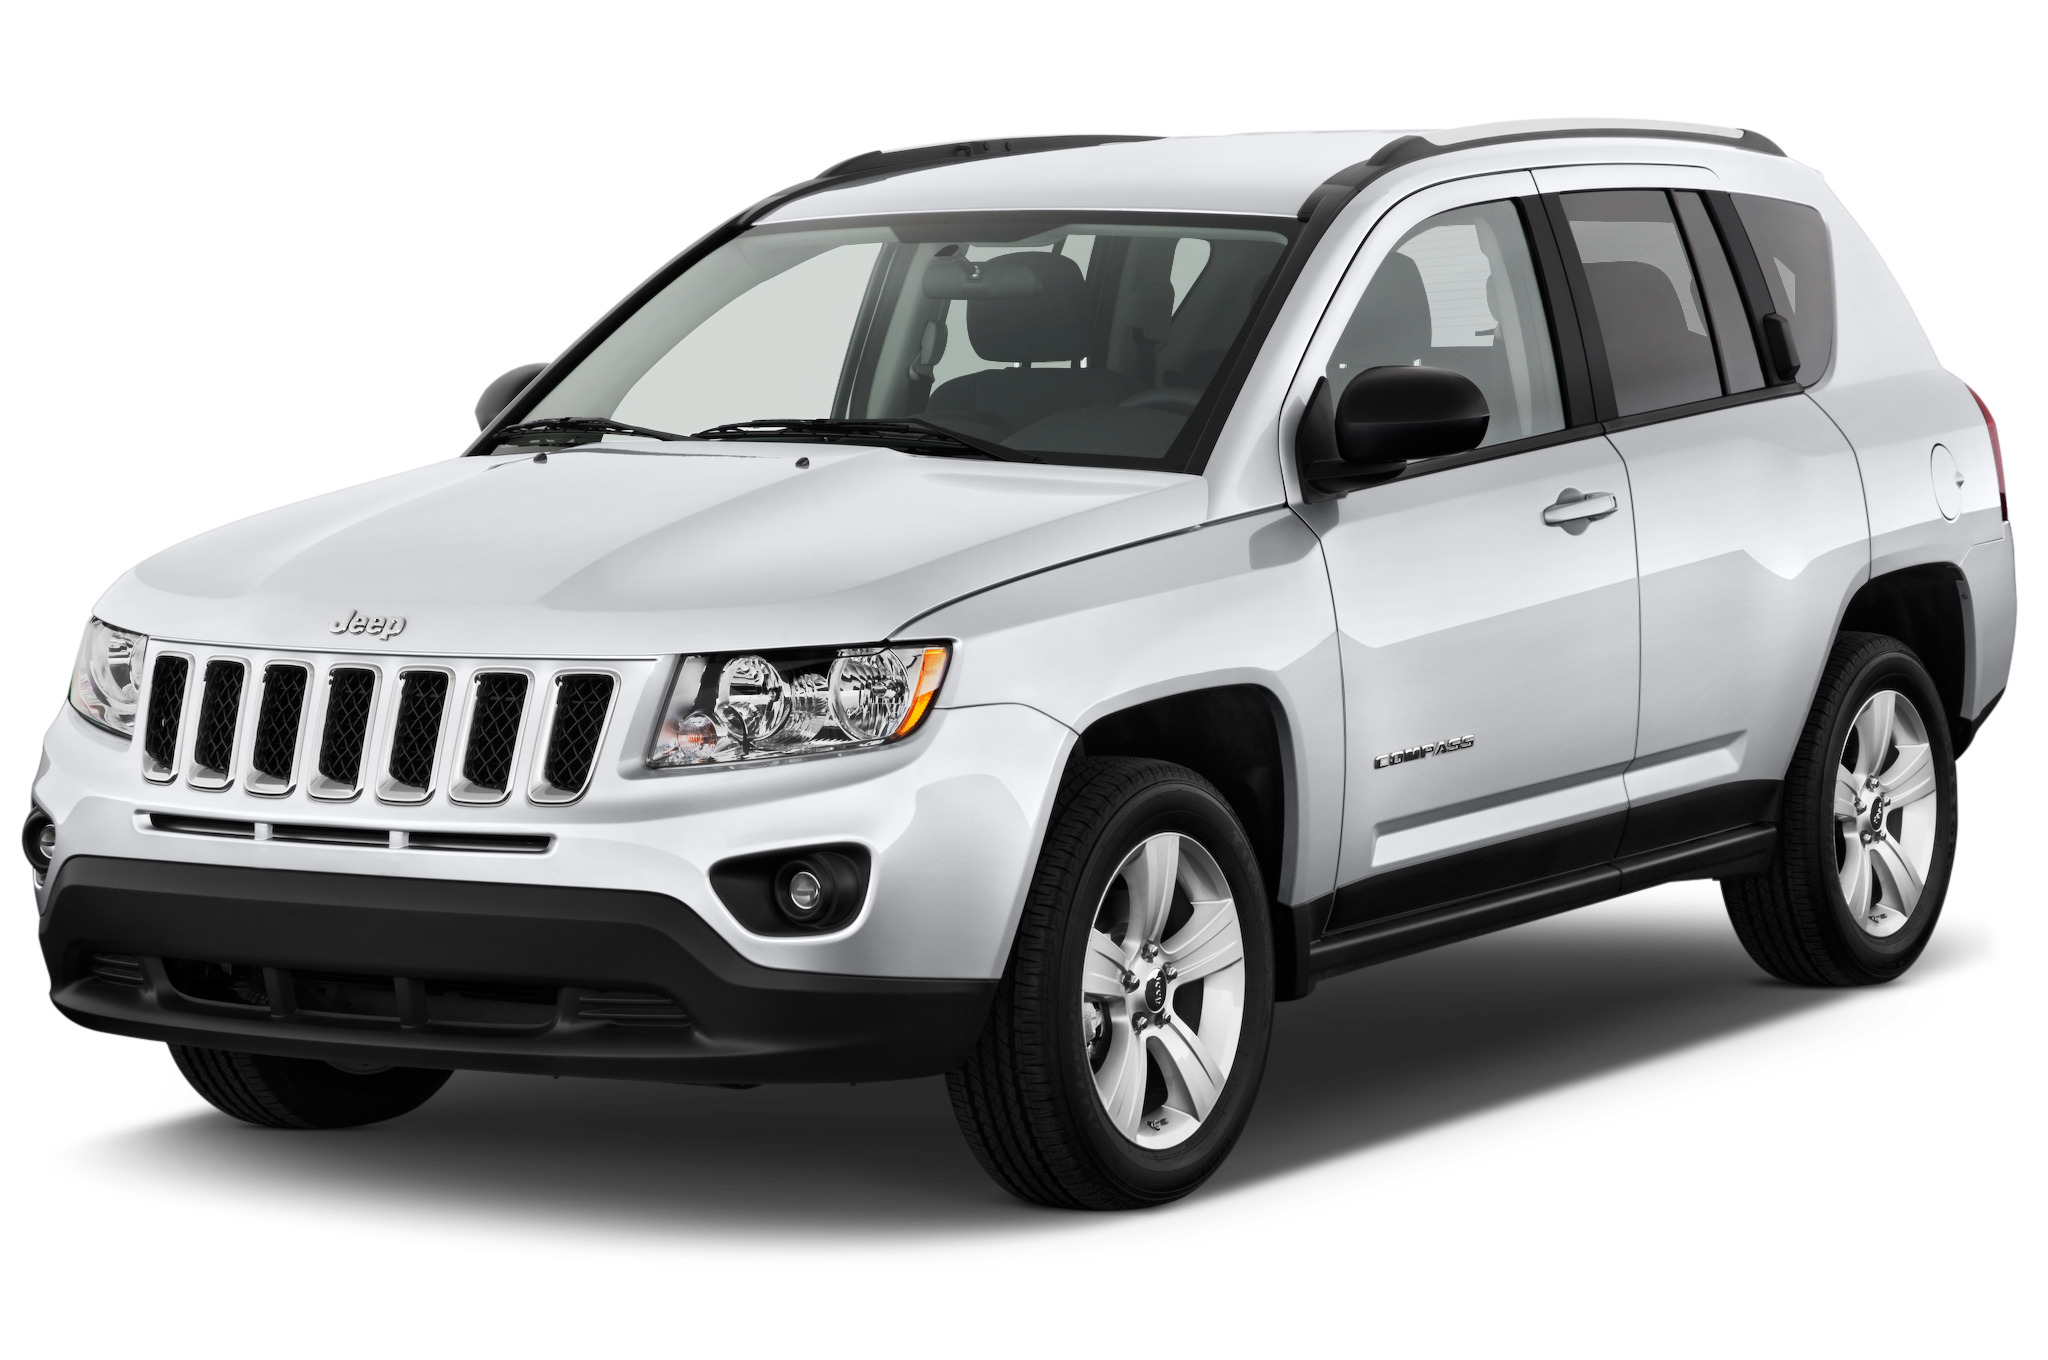 Jeep COMPASS Limited 2014 - International Price & Overview